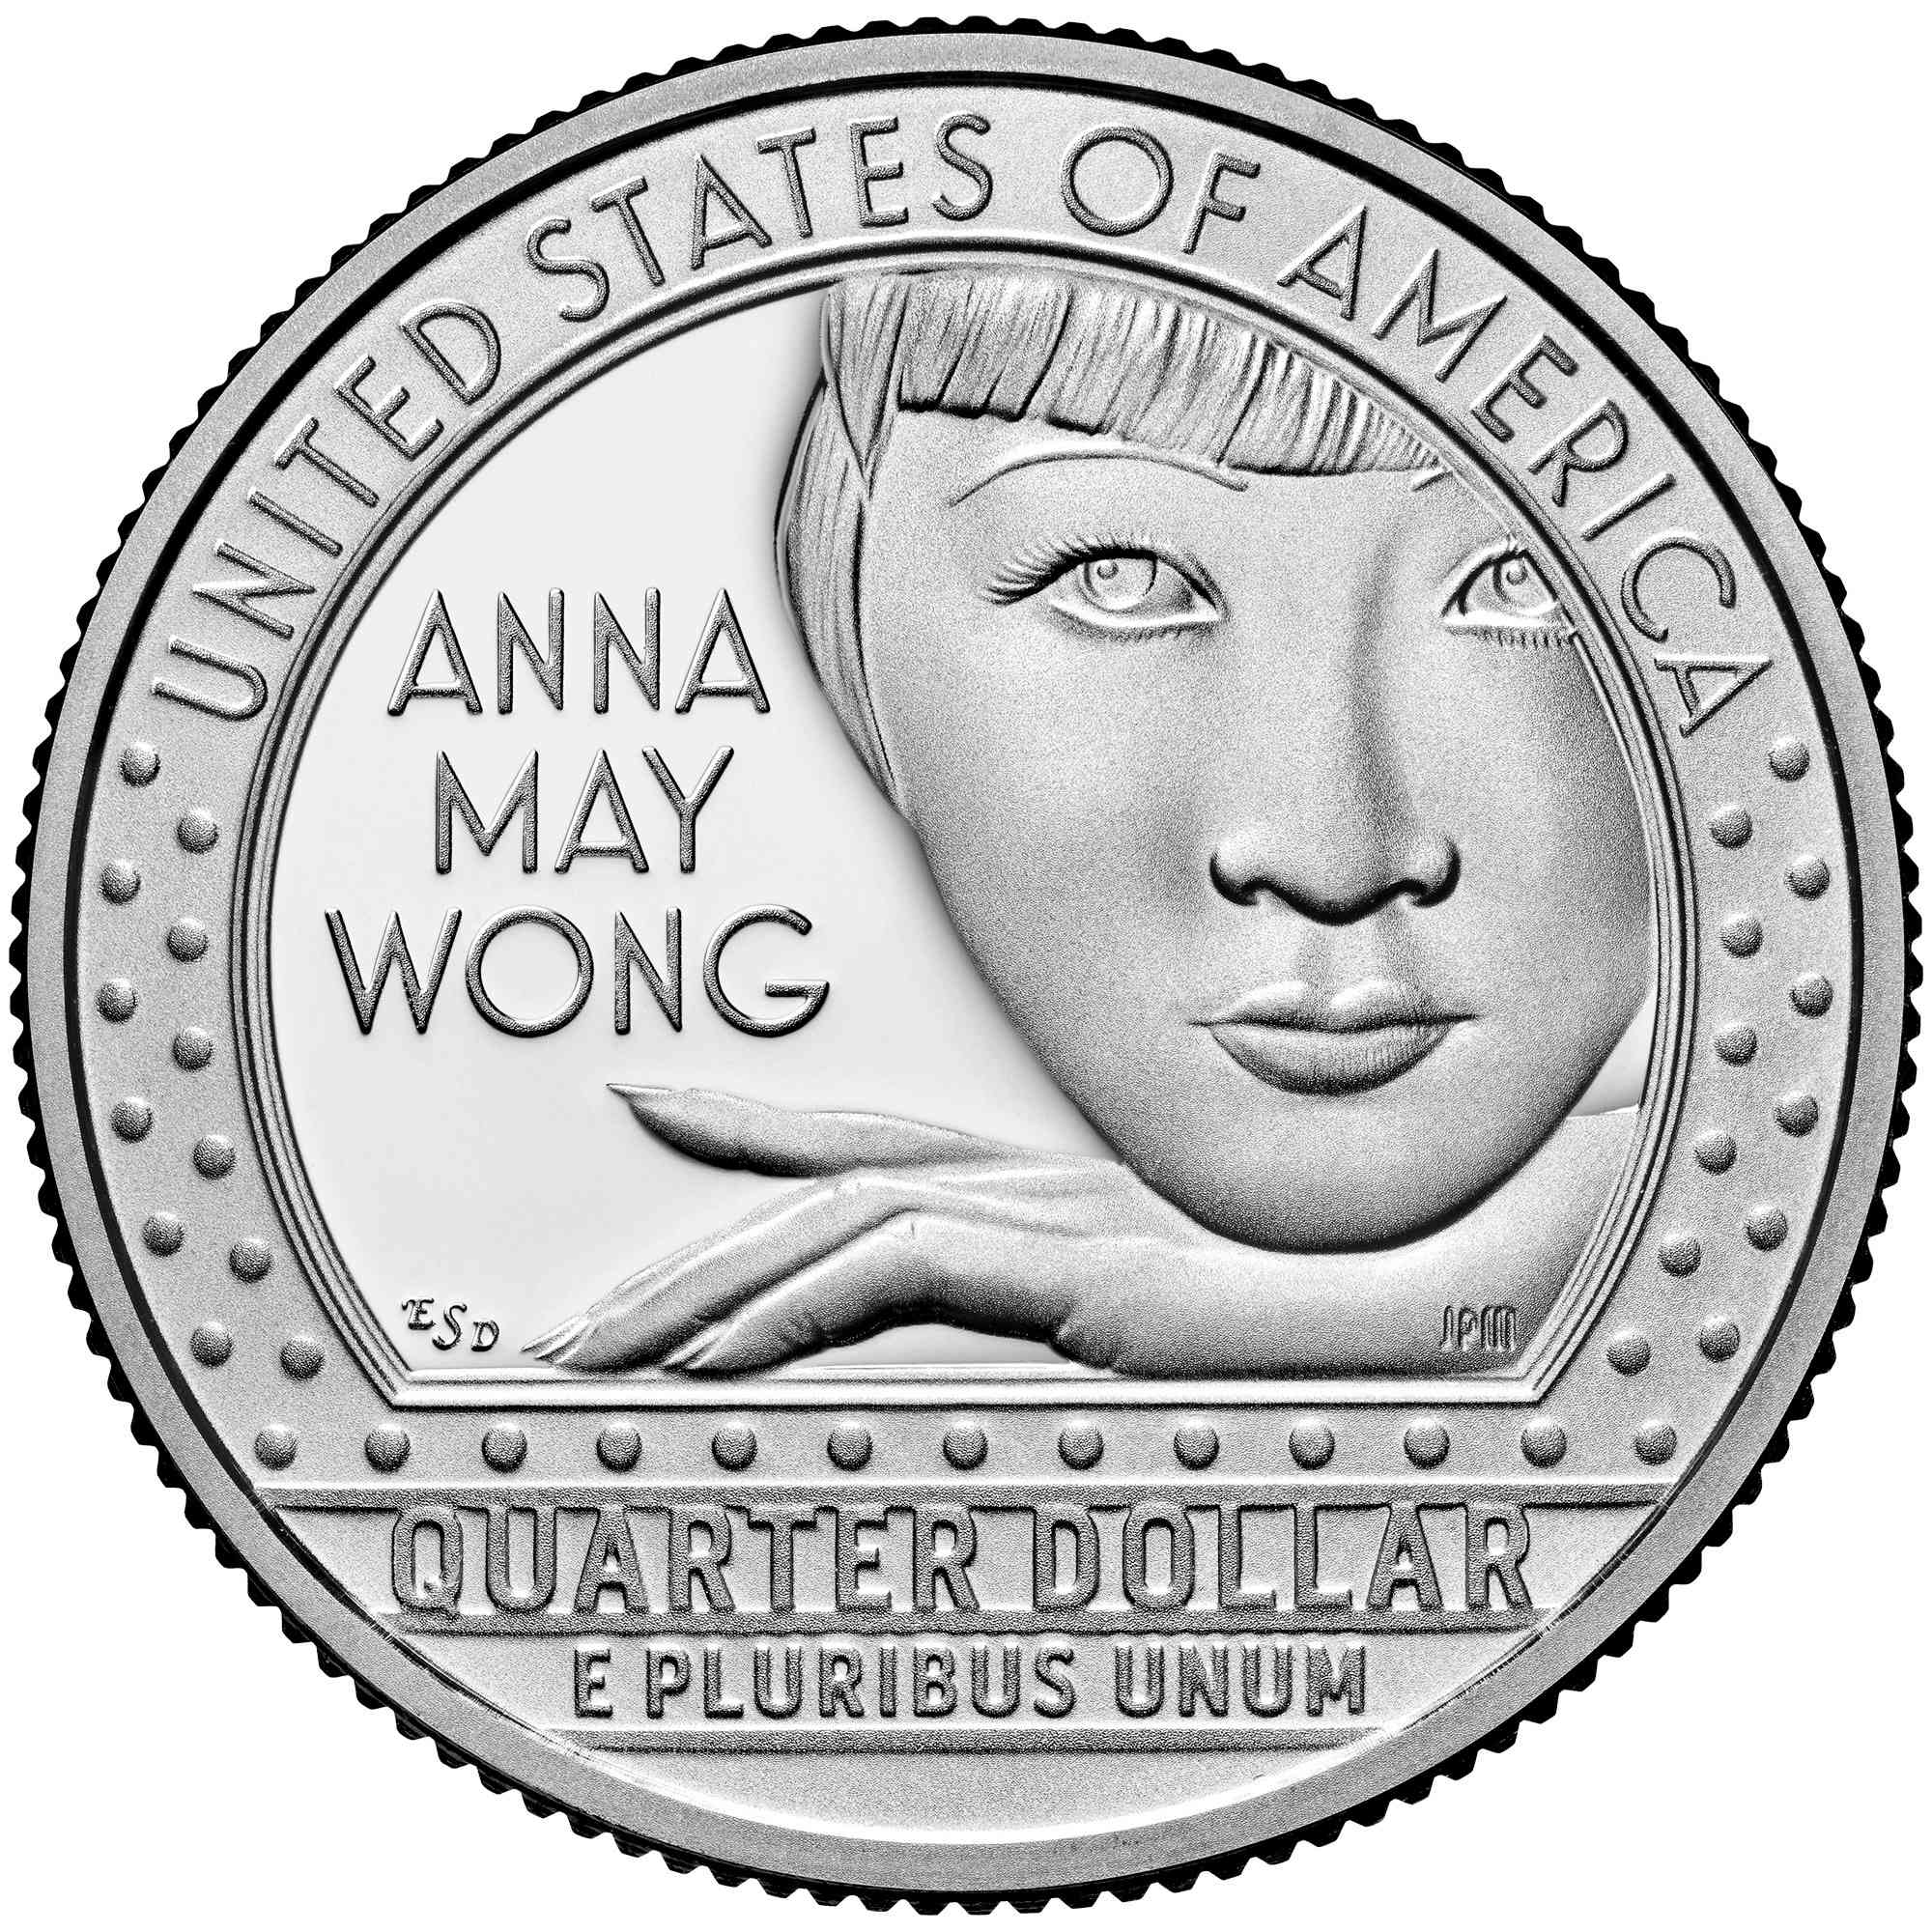 In this handout photo provided by the U.S. Mint, a new US quarter dollar is seen featuring, Anna May Wong, the first Chinese American film star in Hollywood. The quarter is part of the American Women Quarters (AWQ) Program, The U.S. Mint has begun minting the first of 20 quarters honoring selected American women through 2025.